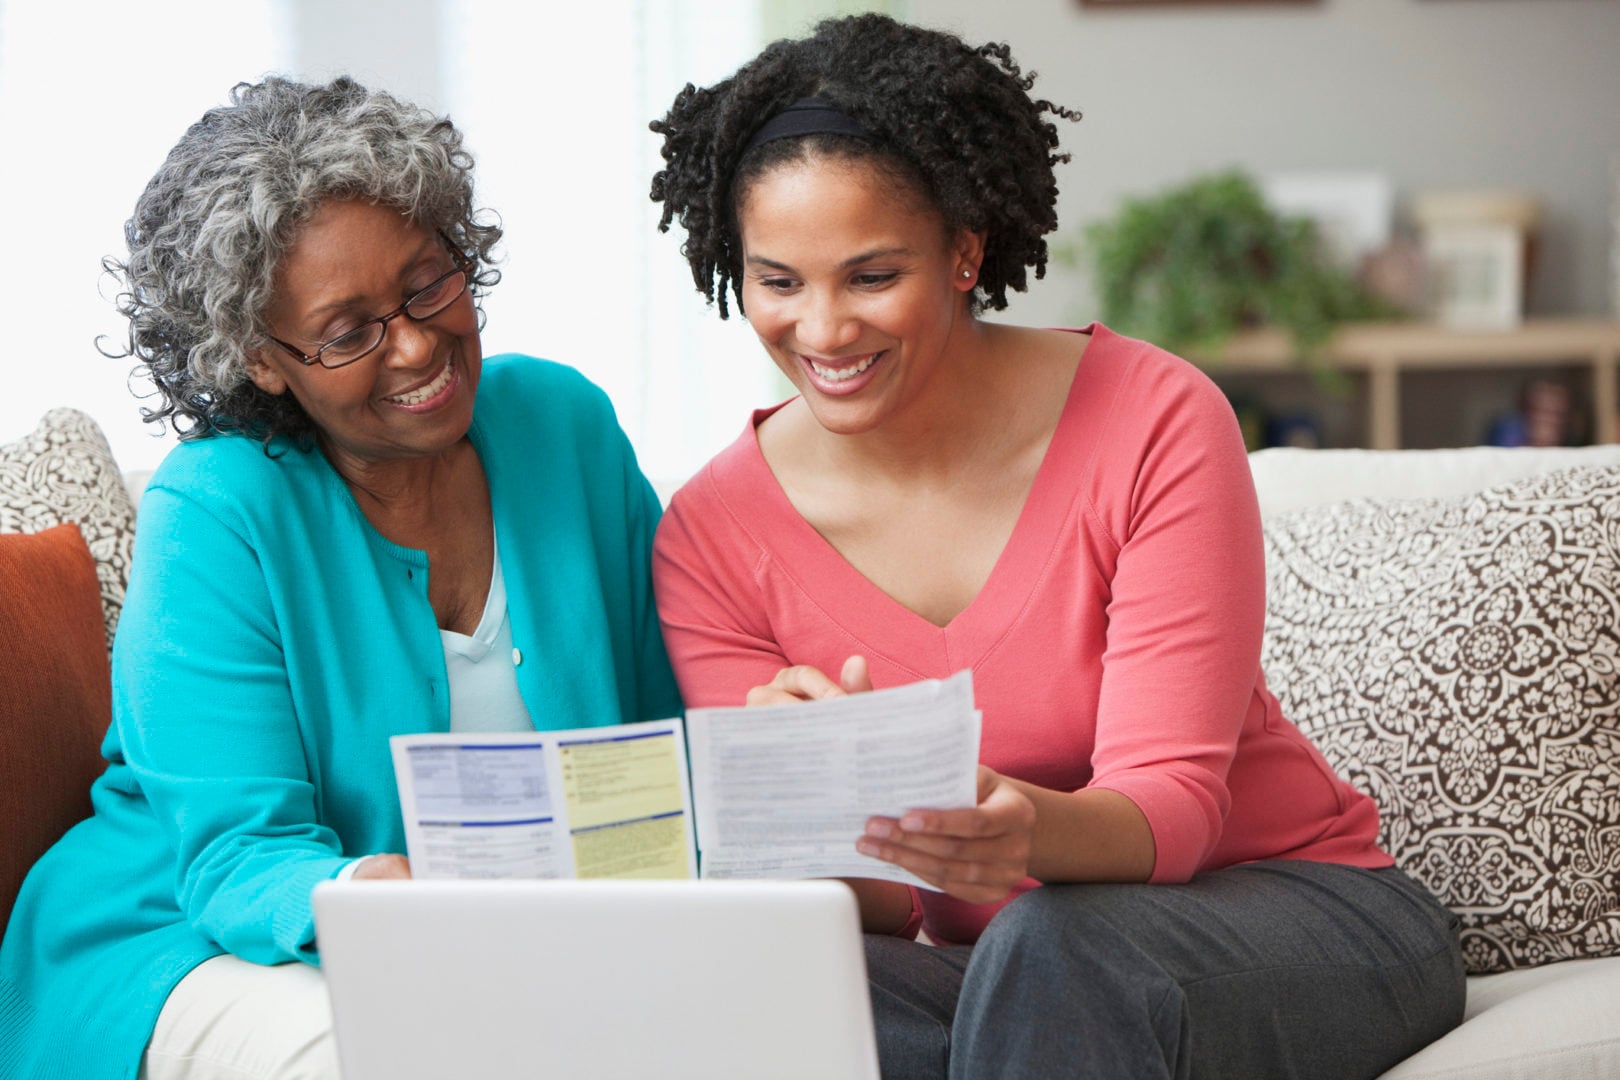 Dependent Care Accounts: The best way to save on child and senior care costs